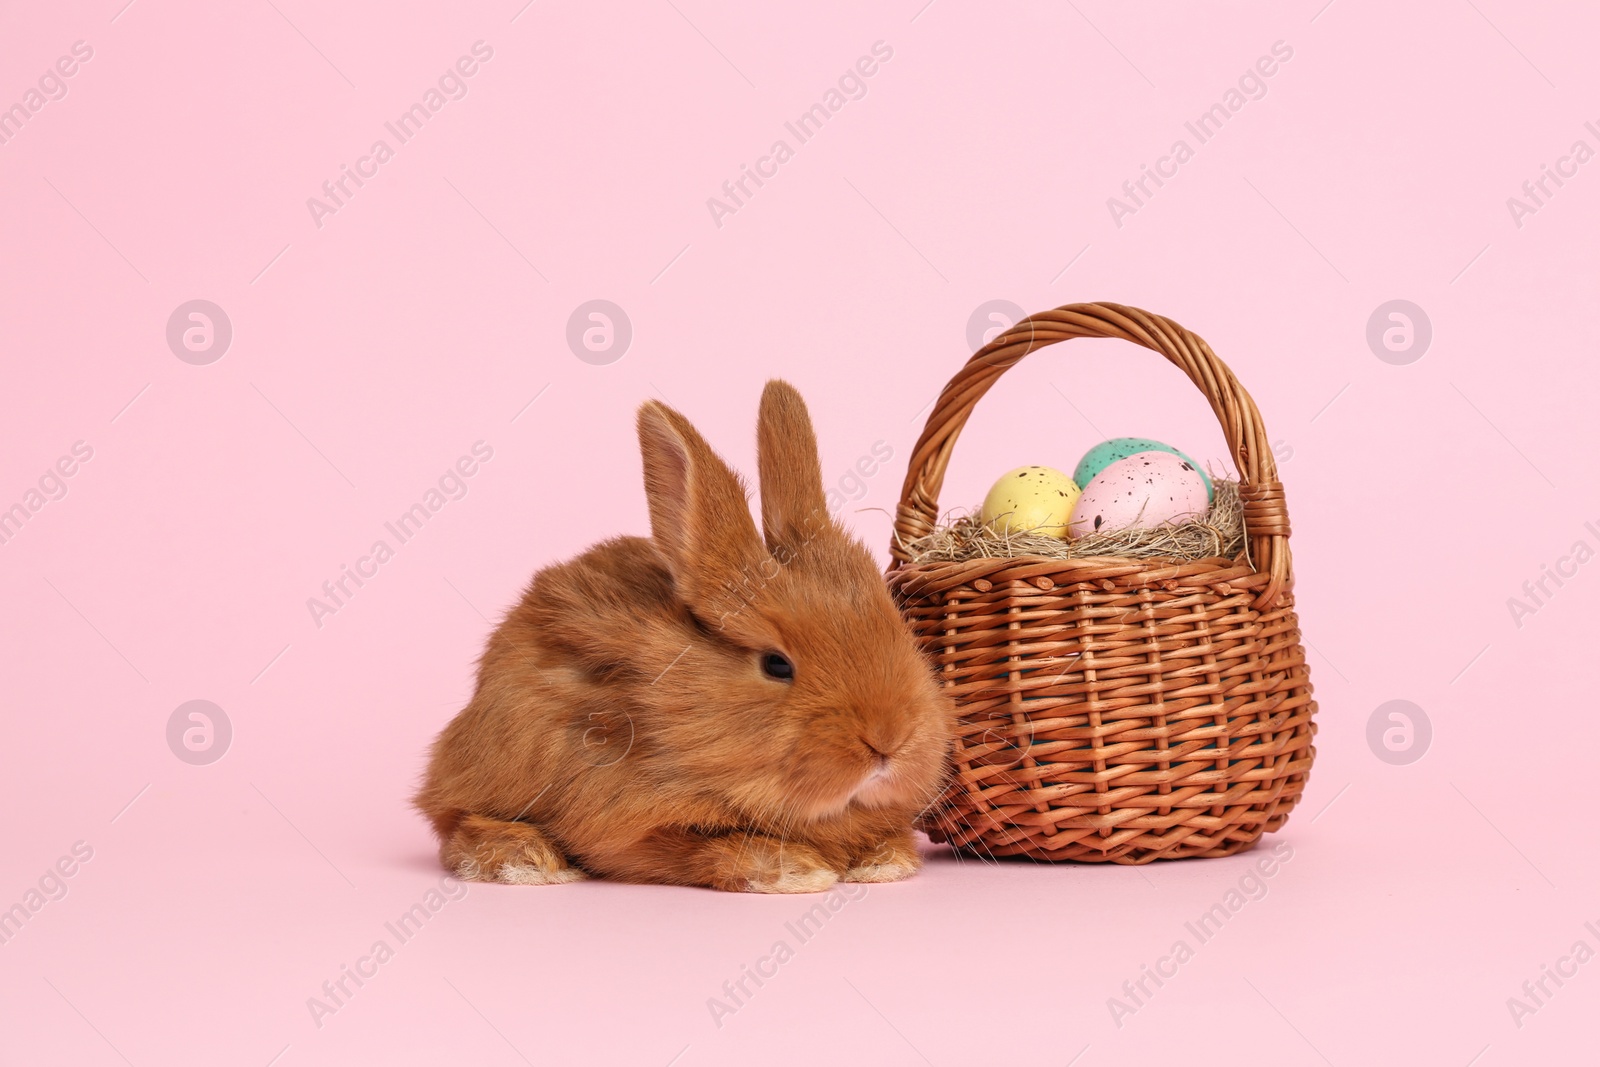 Photo of Adorable fluffy bunny near wicker basket with Easter eggs on pink background